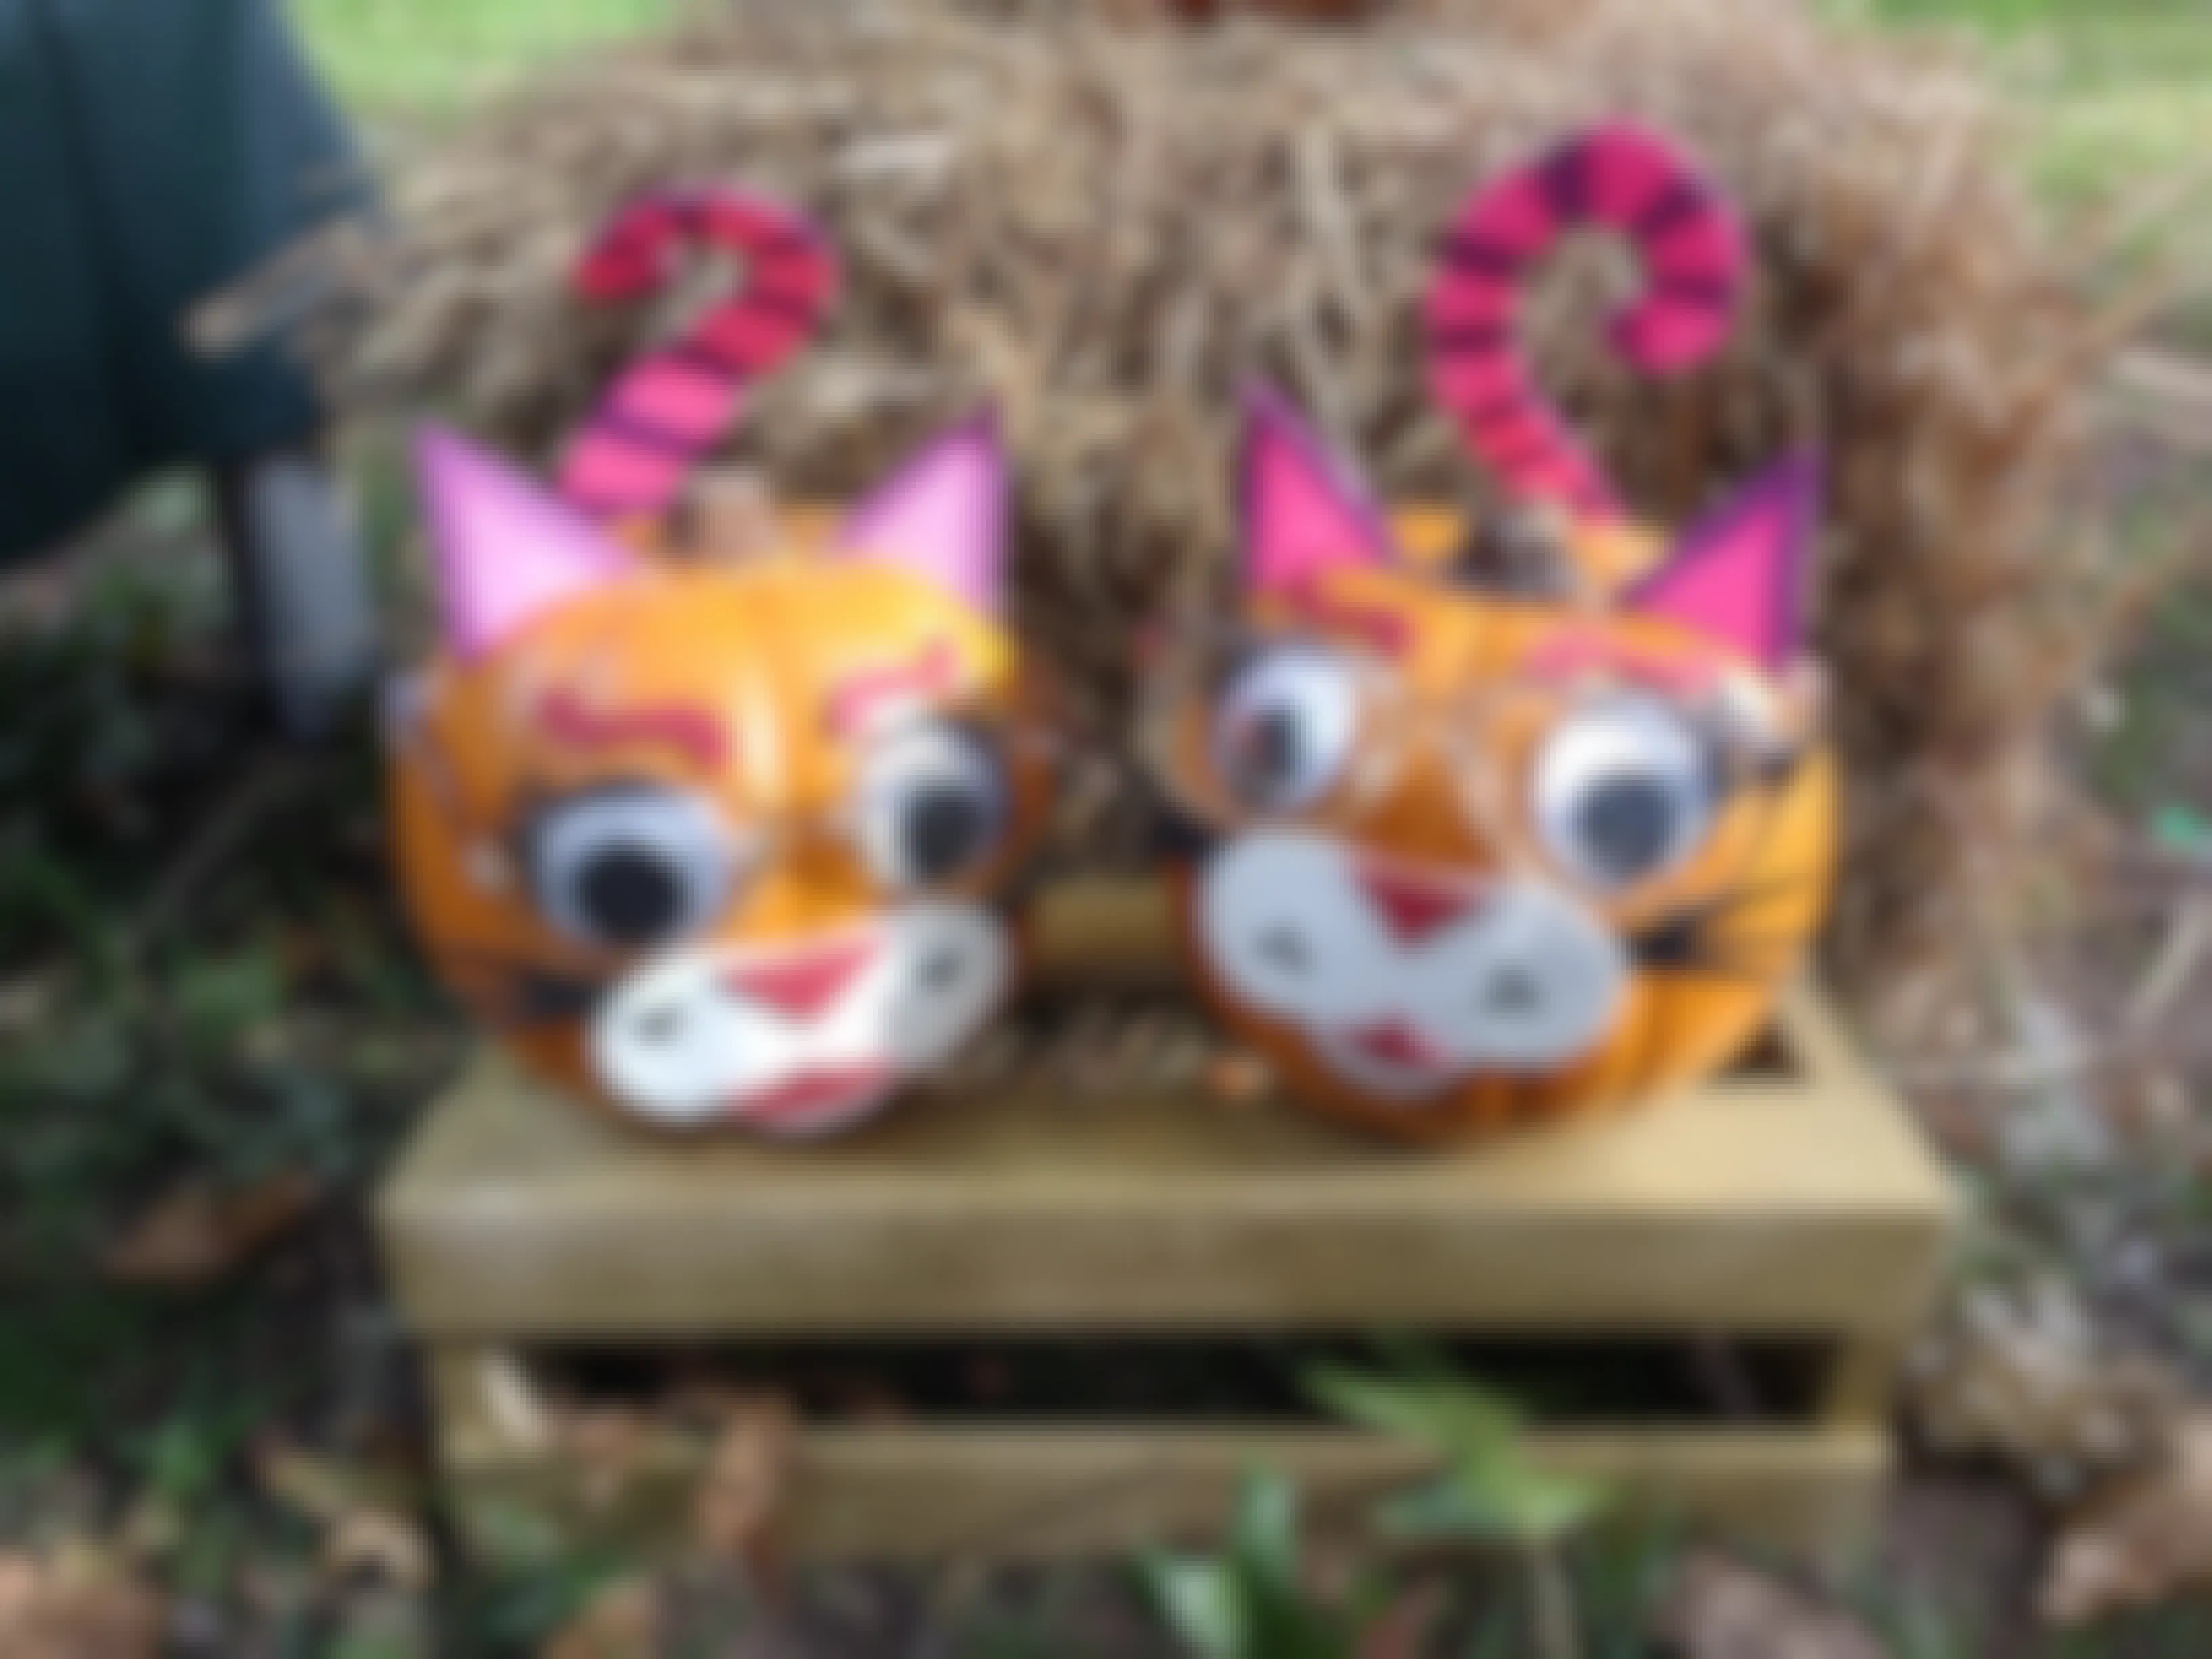 two pumpkins decorated like cats with glasses